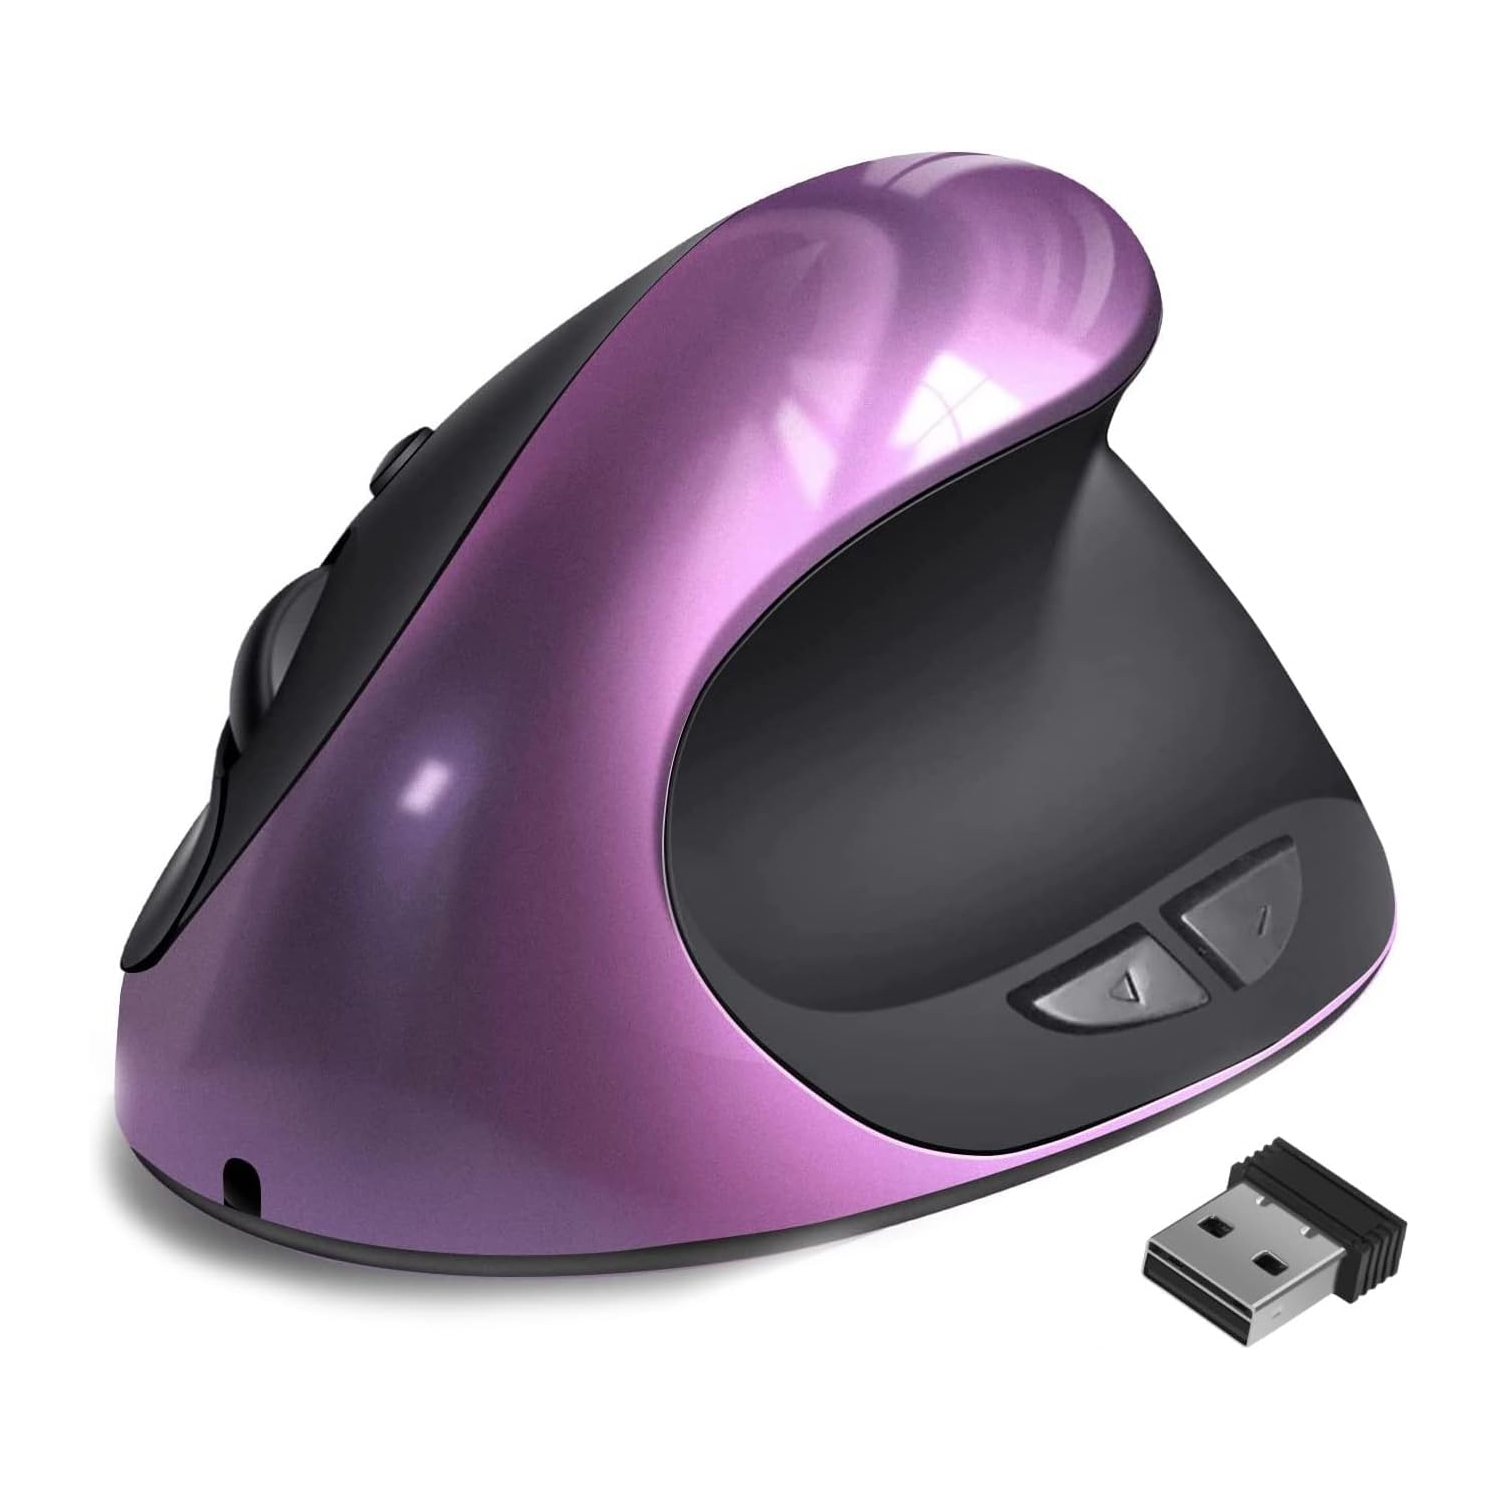 Ergonomic Mouse,Rechargeable Small Vertical Mouse with 6 Buttons Adjustable 800/1200/1600 DPI Purple Wireless Mouse for Laptop, Desktop, PC, MacBook